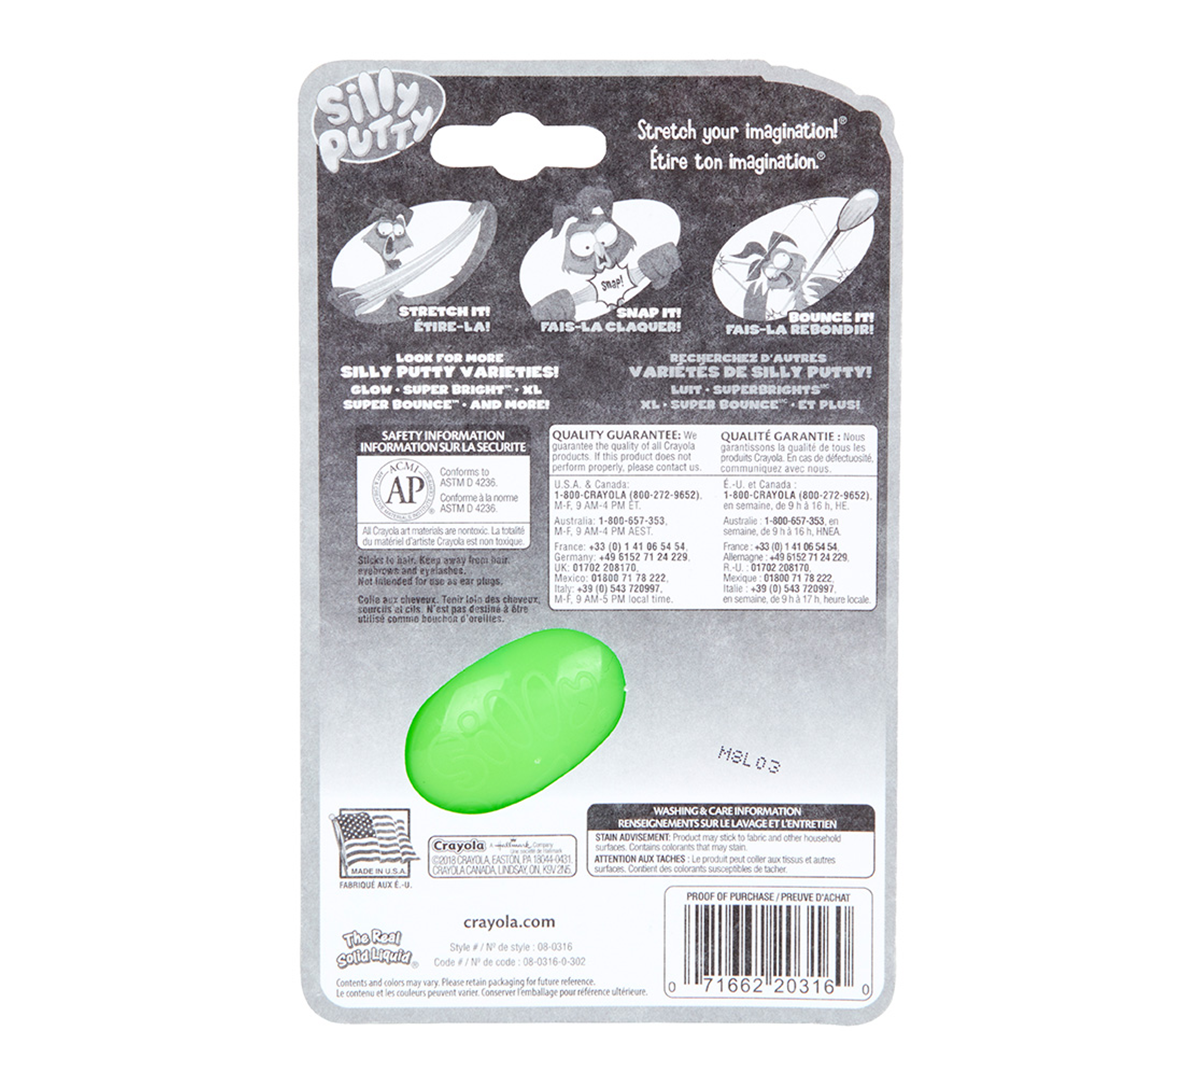 Crayola Bs080316 Silly Putty Glow in Dark Carded for sale online 